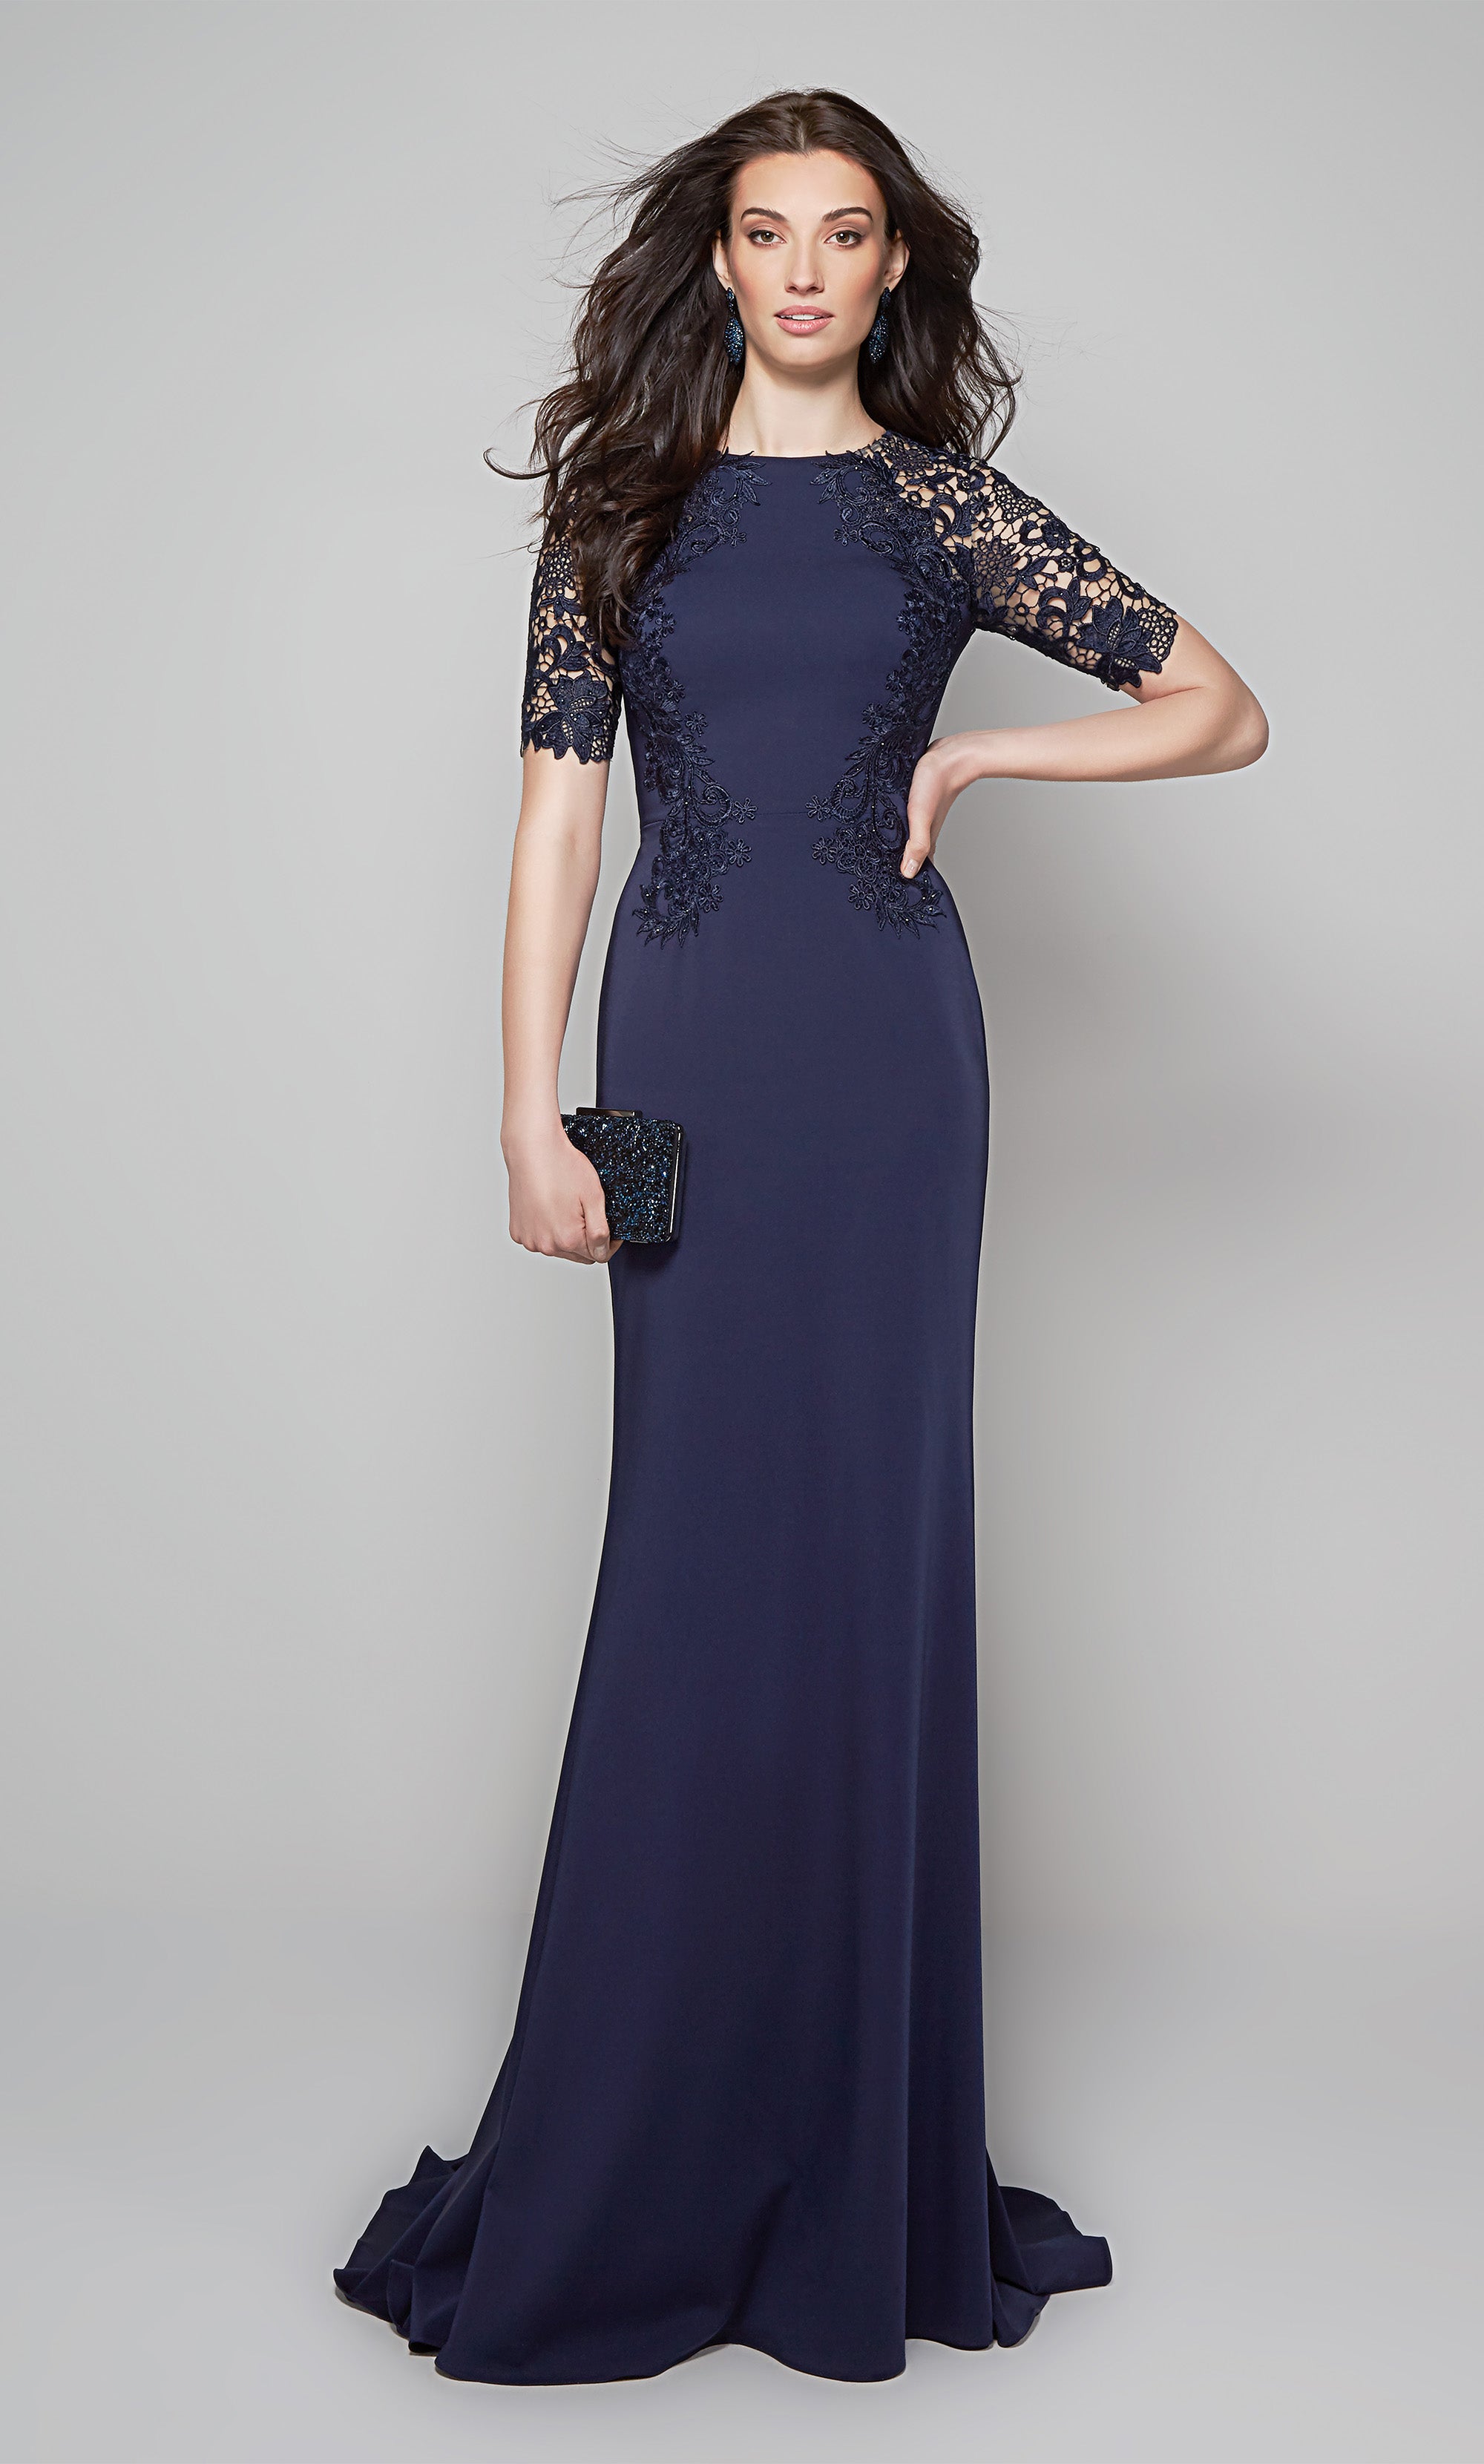 Navy Blue Resham Embroidered Net Evening Gown | Indian evening gown, Gown  dress party wear, Indian wedding gowns